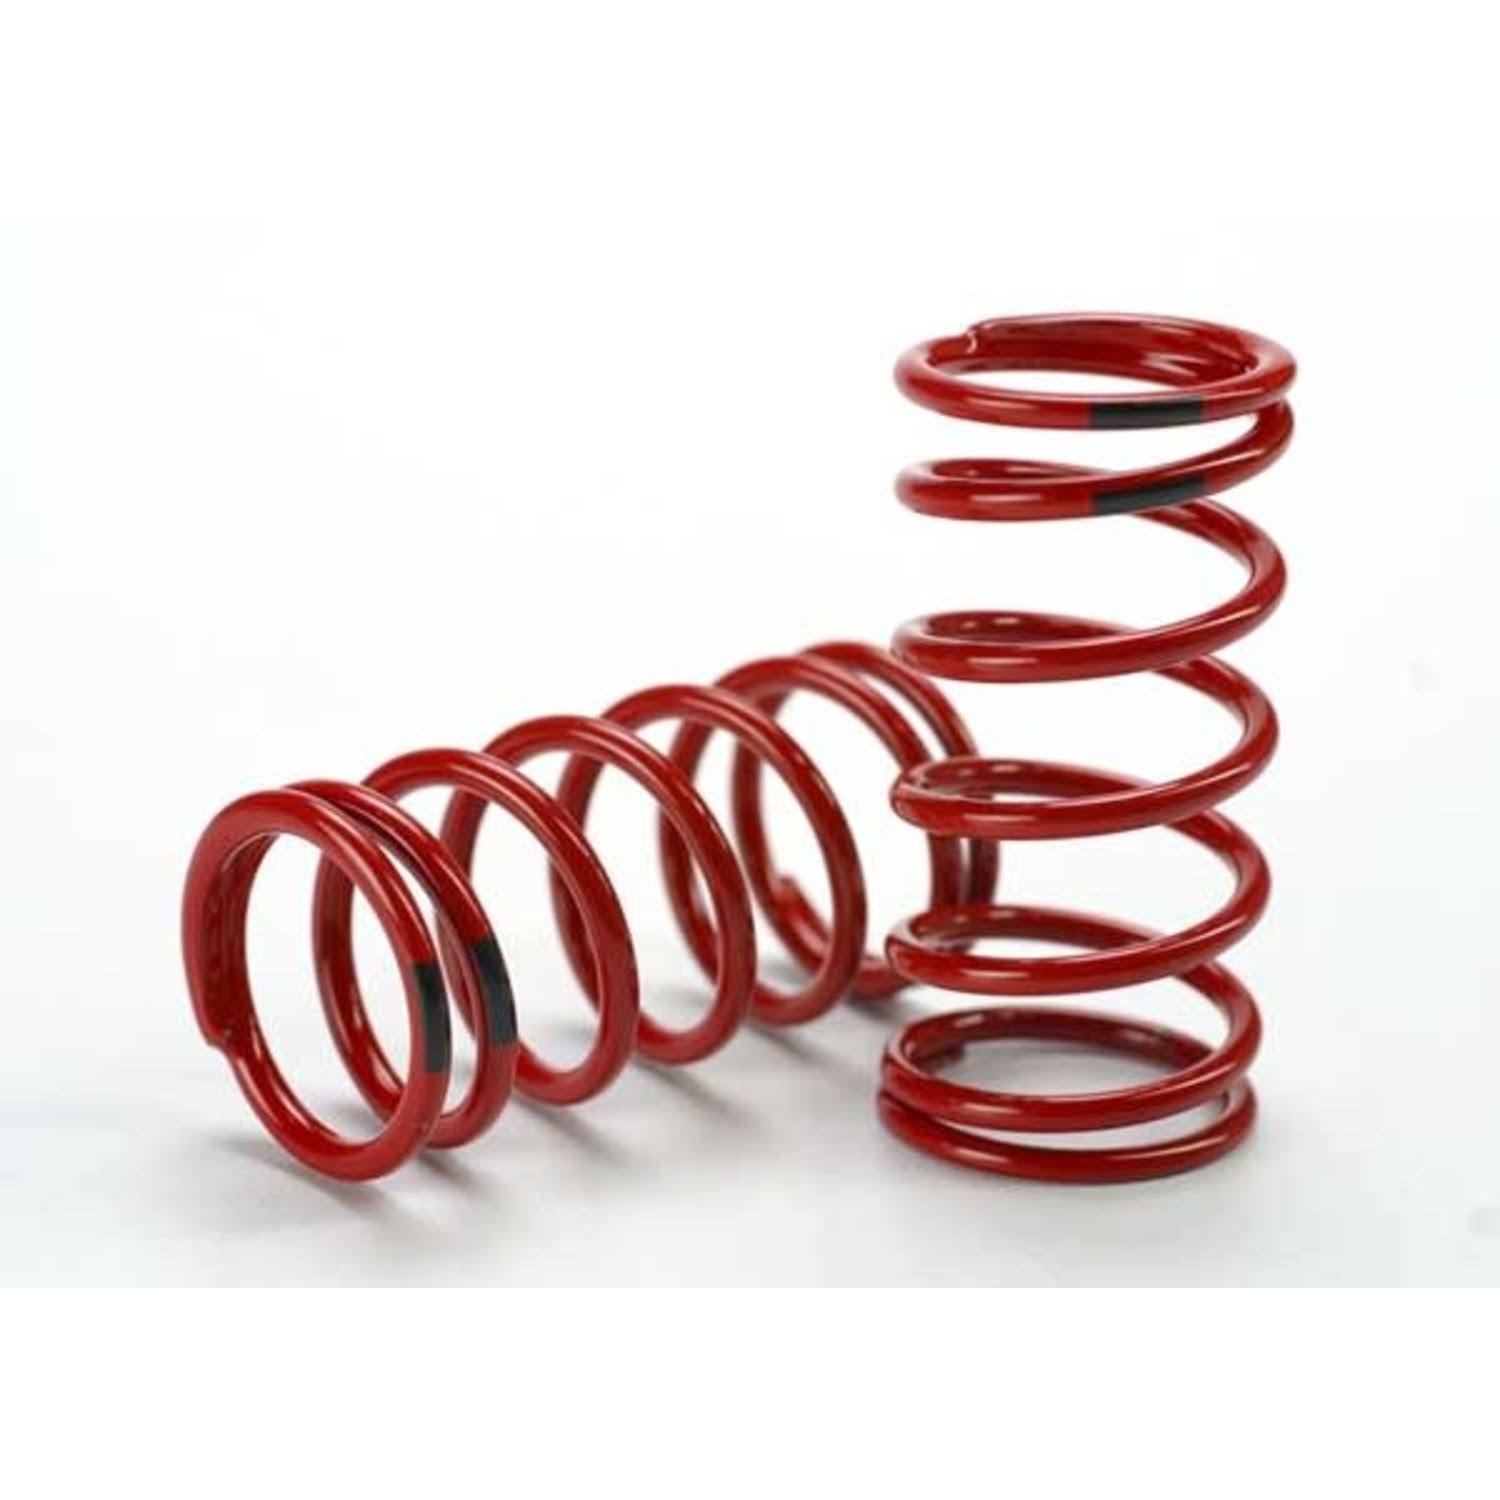 Traxxas 5441 GTR Shock Springs - Red, 2 Count